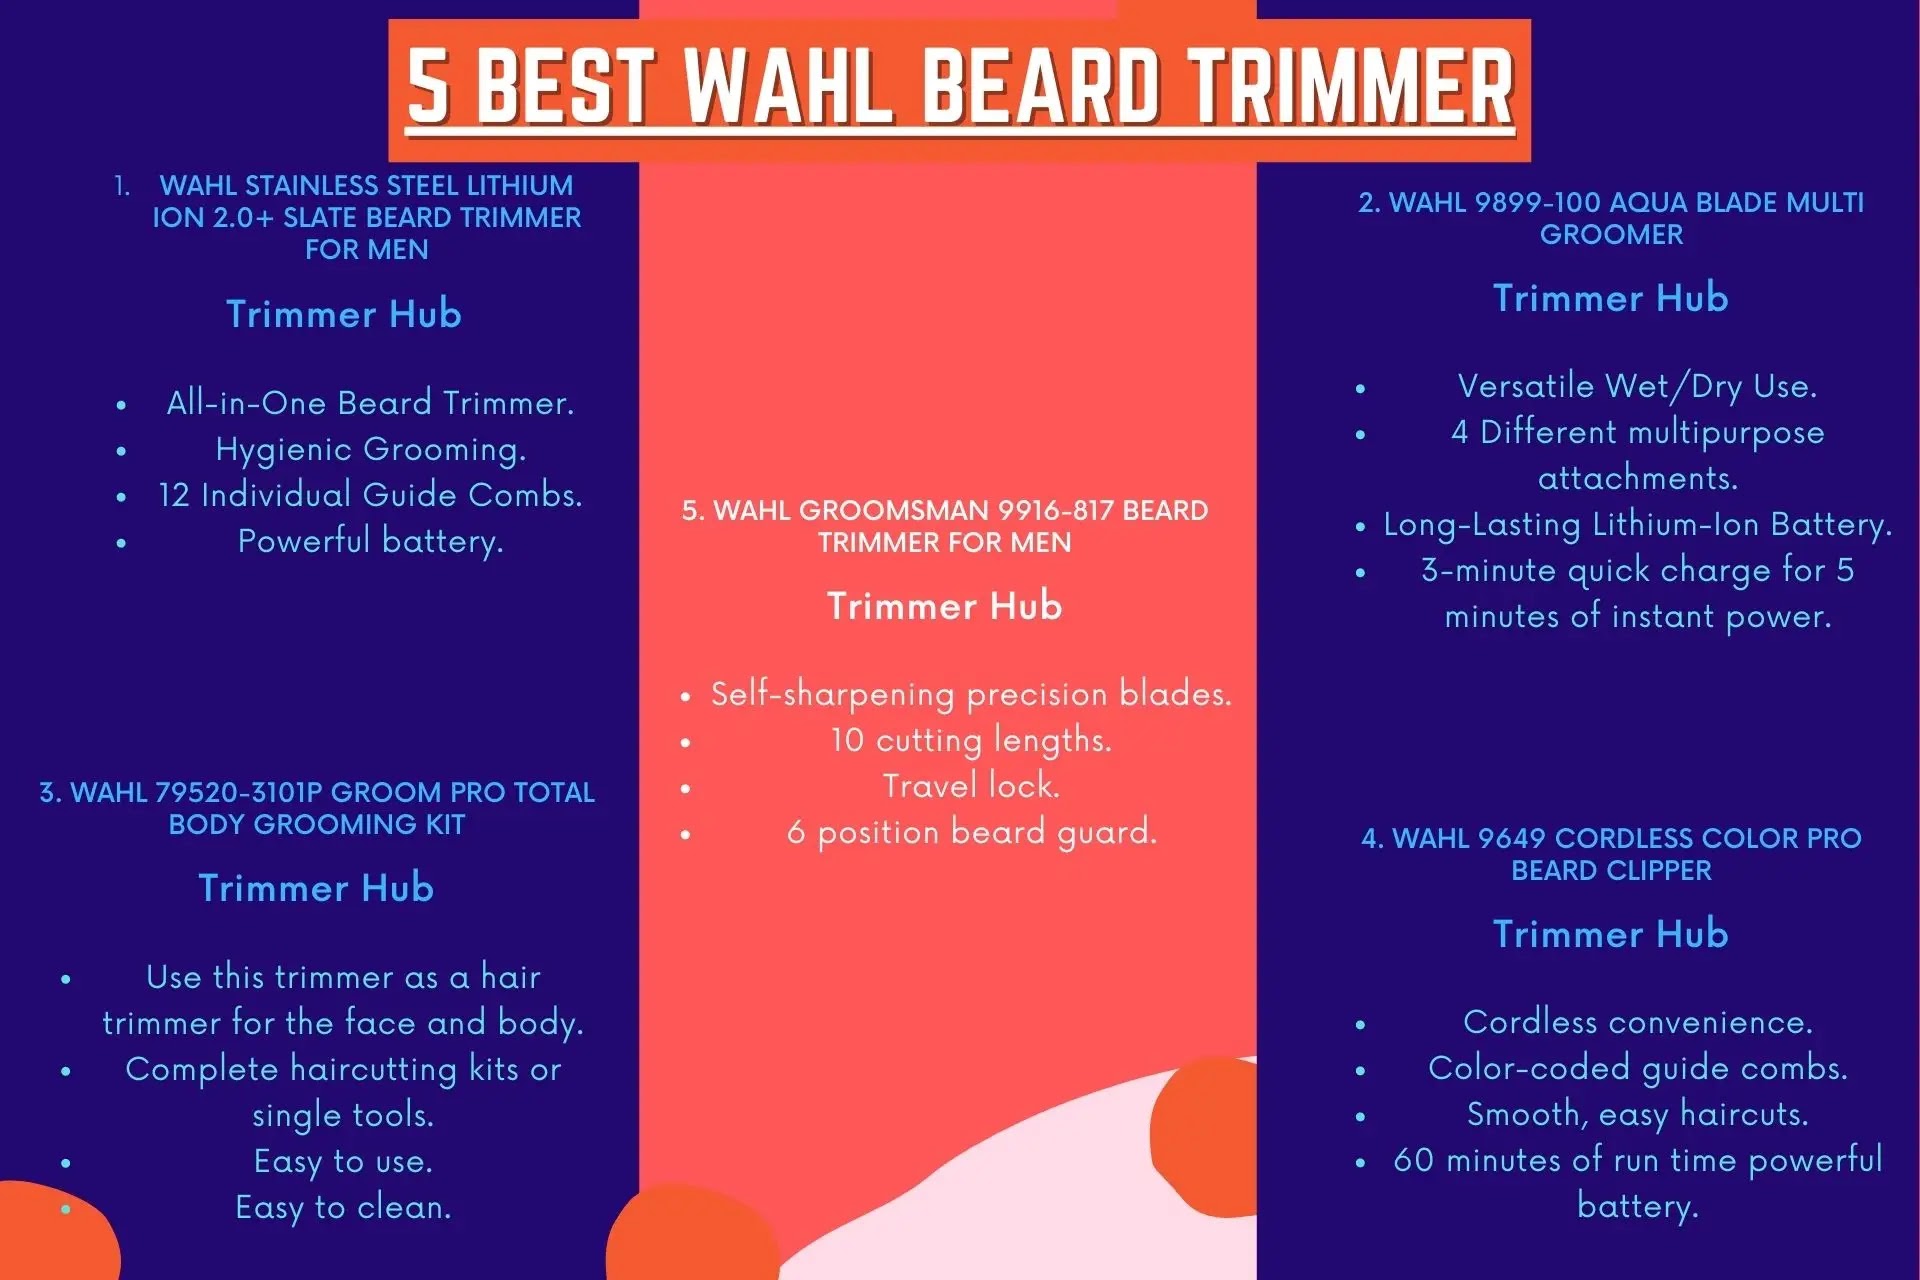 5 Best Wahl Beard Trimmer - How to Find the Best Beard Trimmer